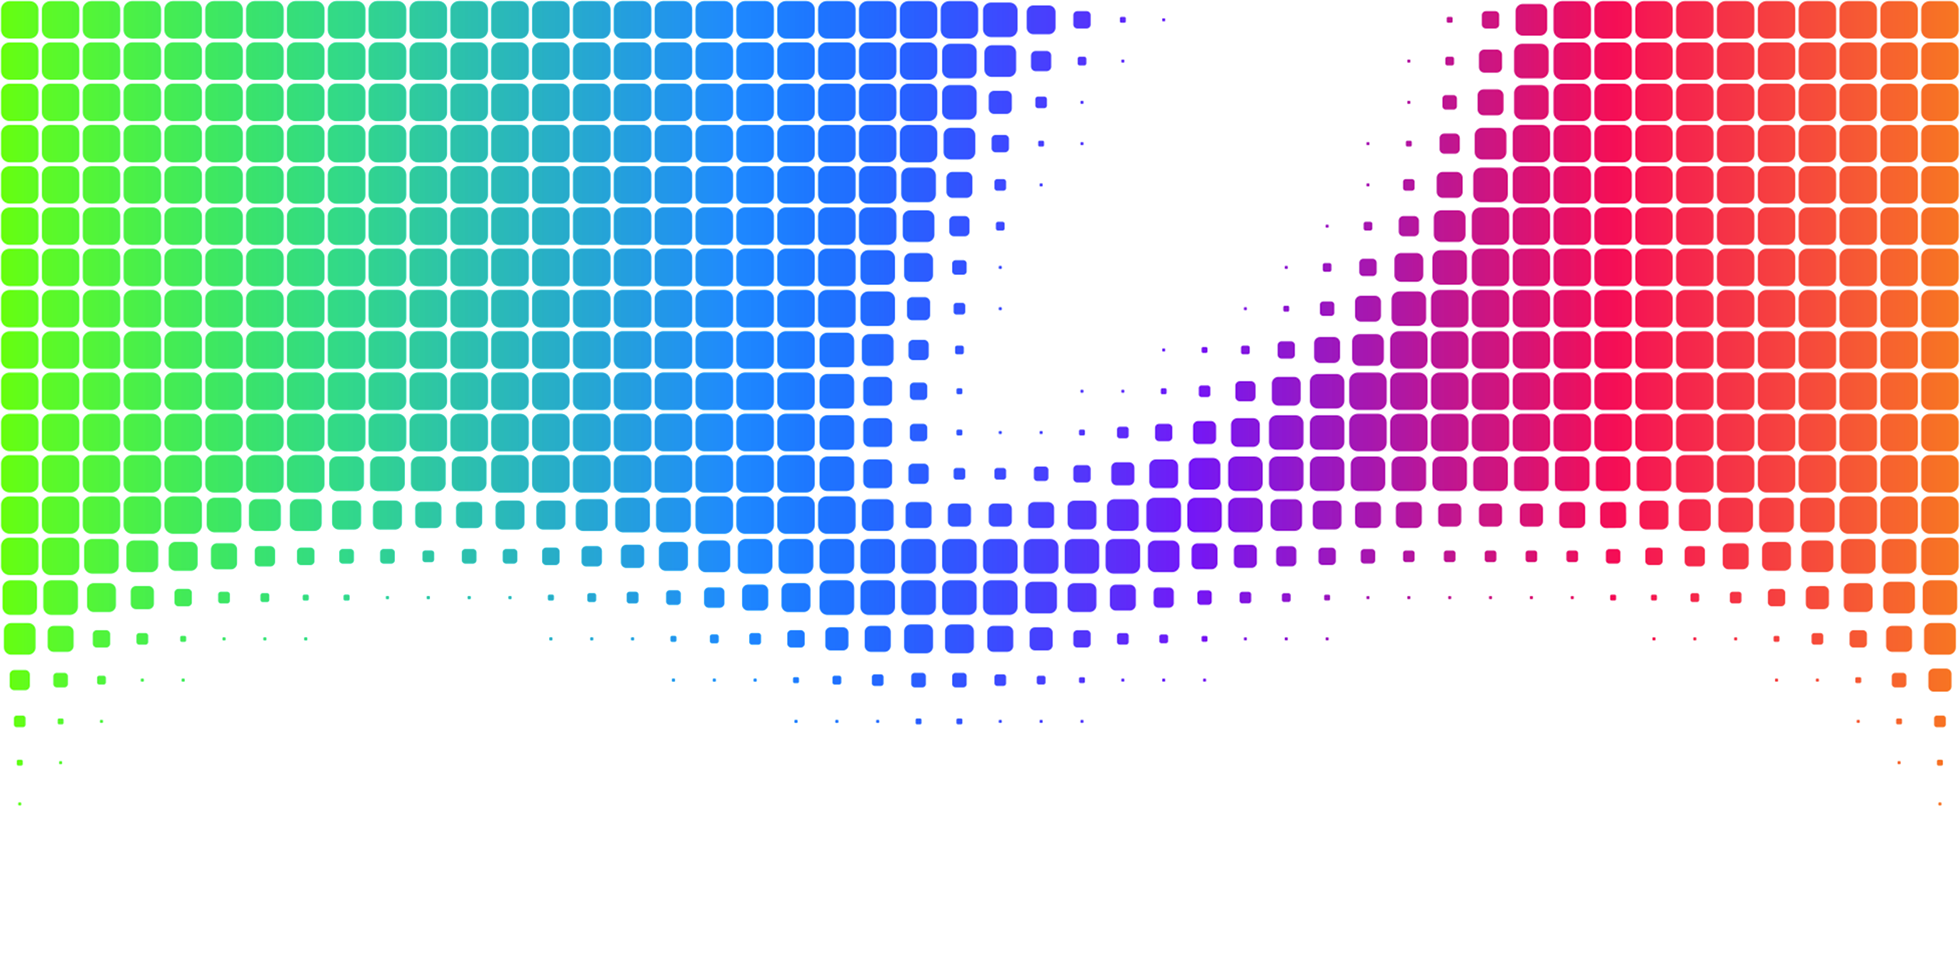 Will Music be the focus of Apple WWDC '14?